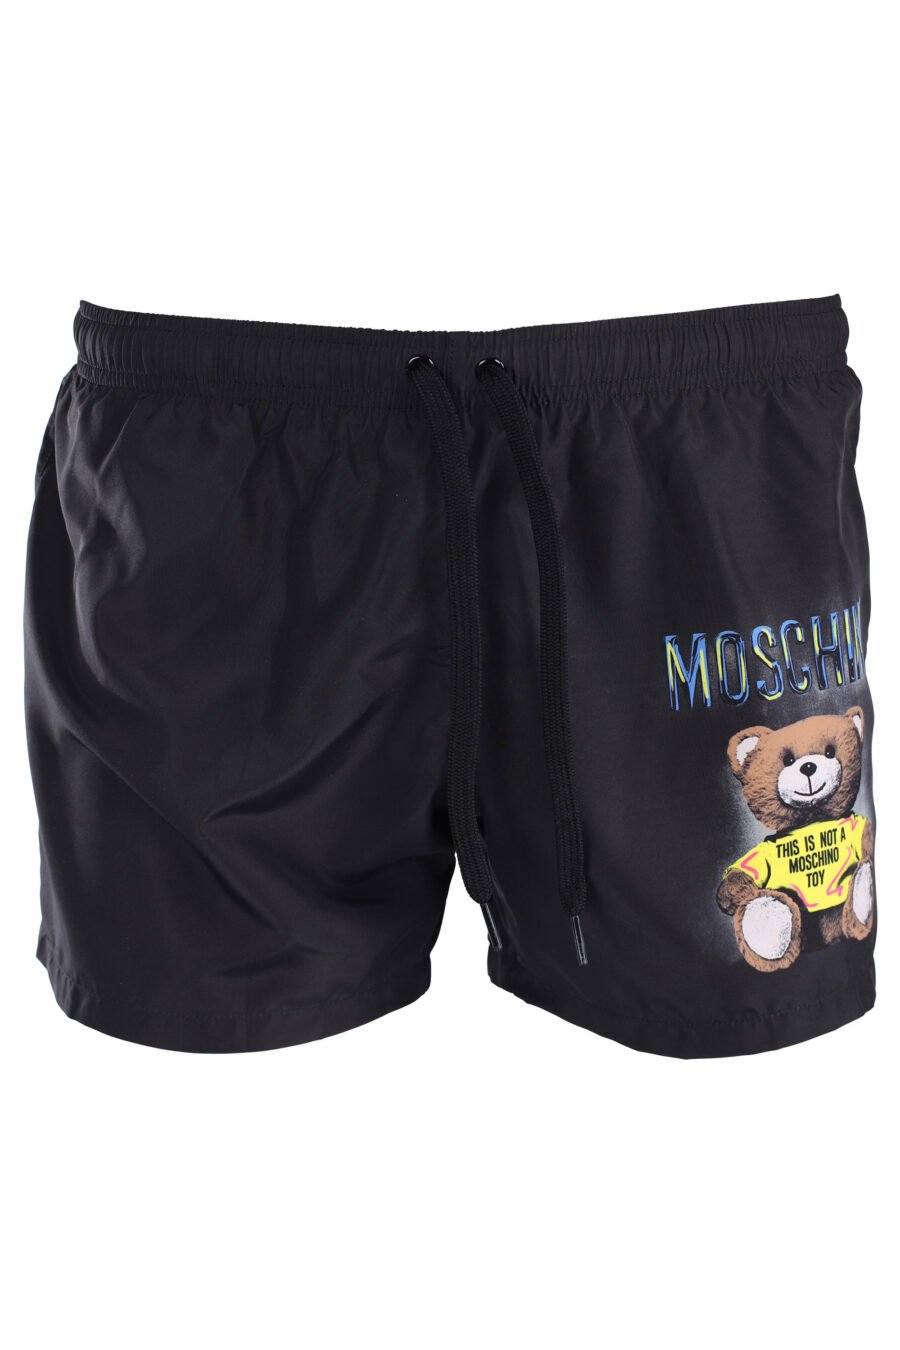 Black swimming costume with side bear logo - IMG 1582